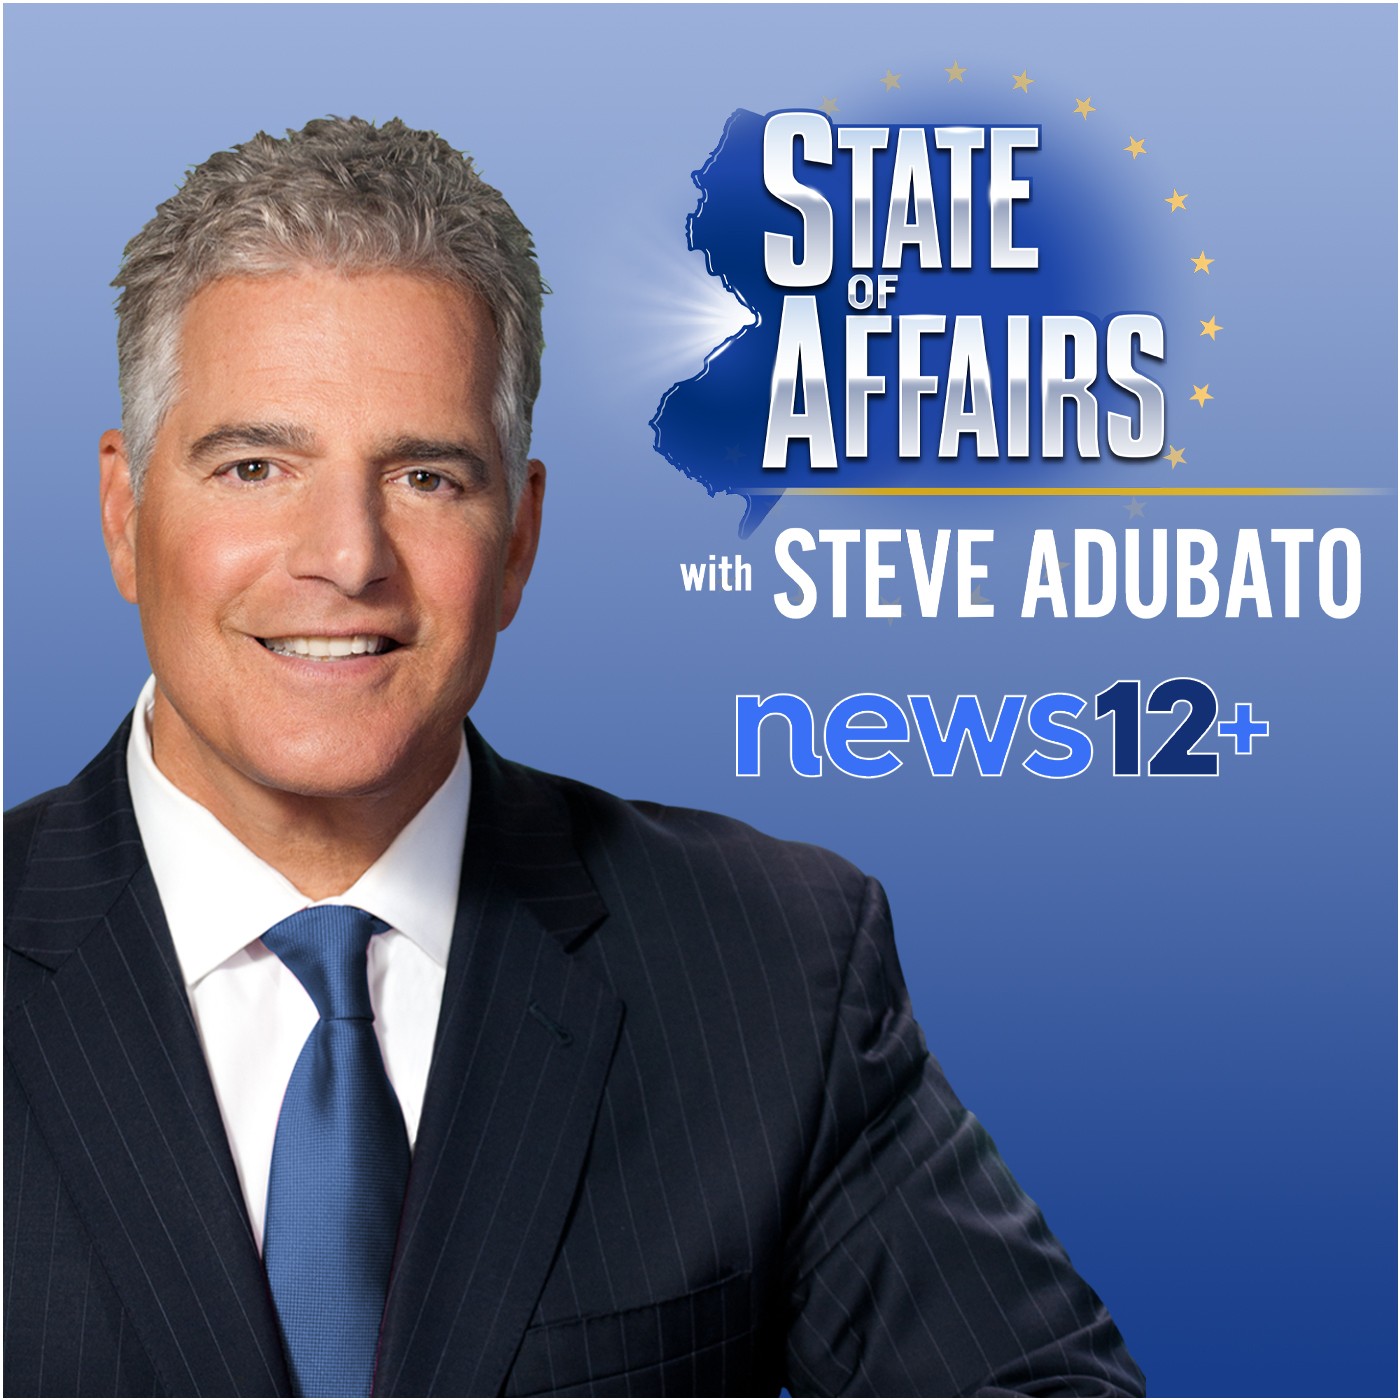 State of Affairs on News 12+